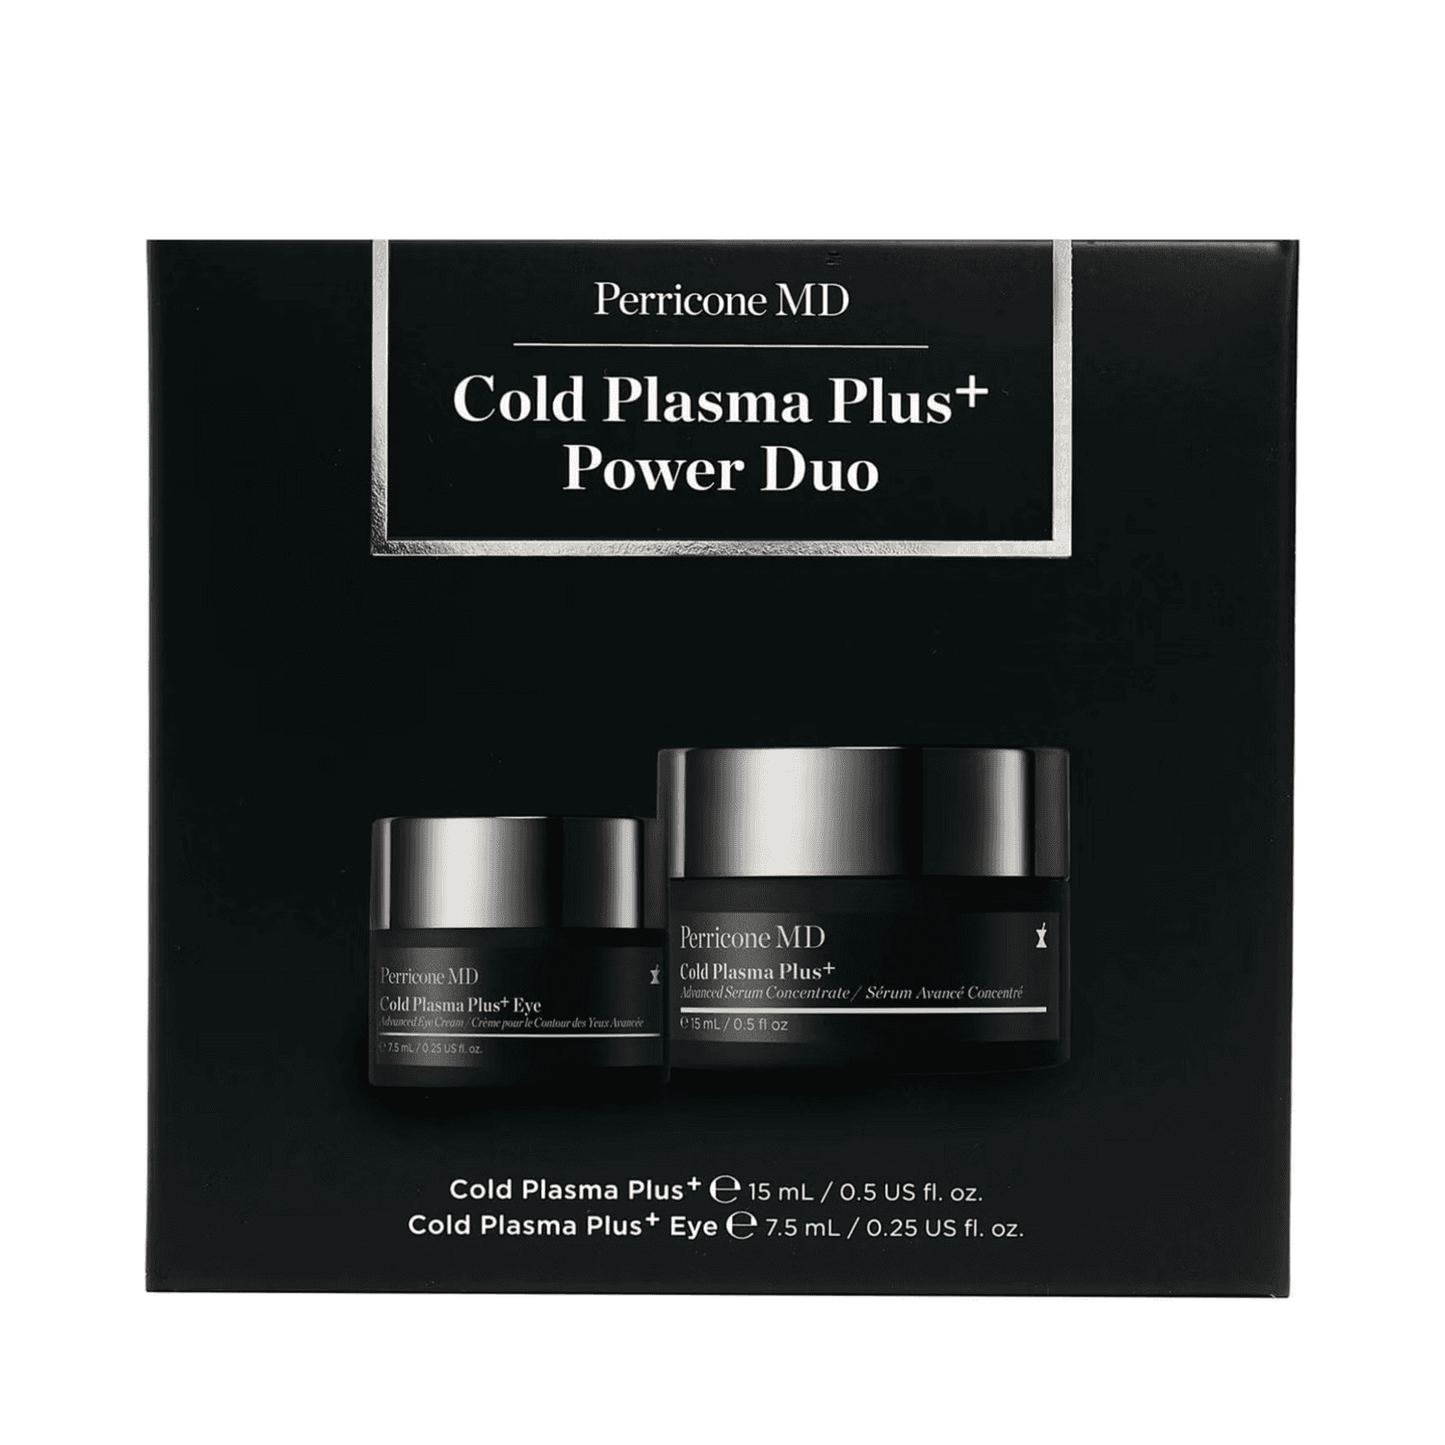 Perricone MD Cold Plasma Plus+ Power Duo